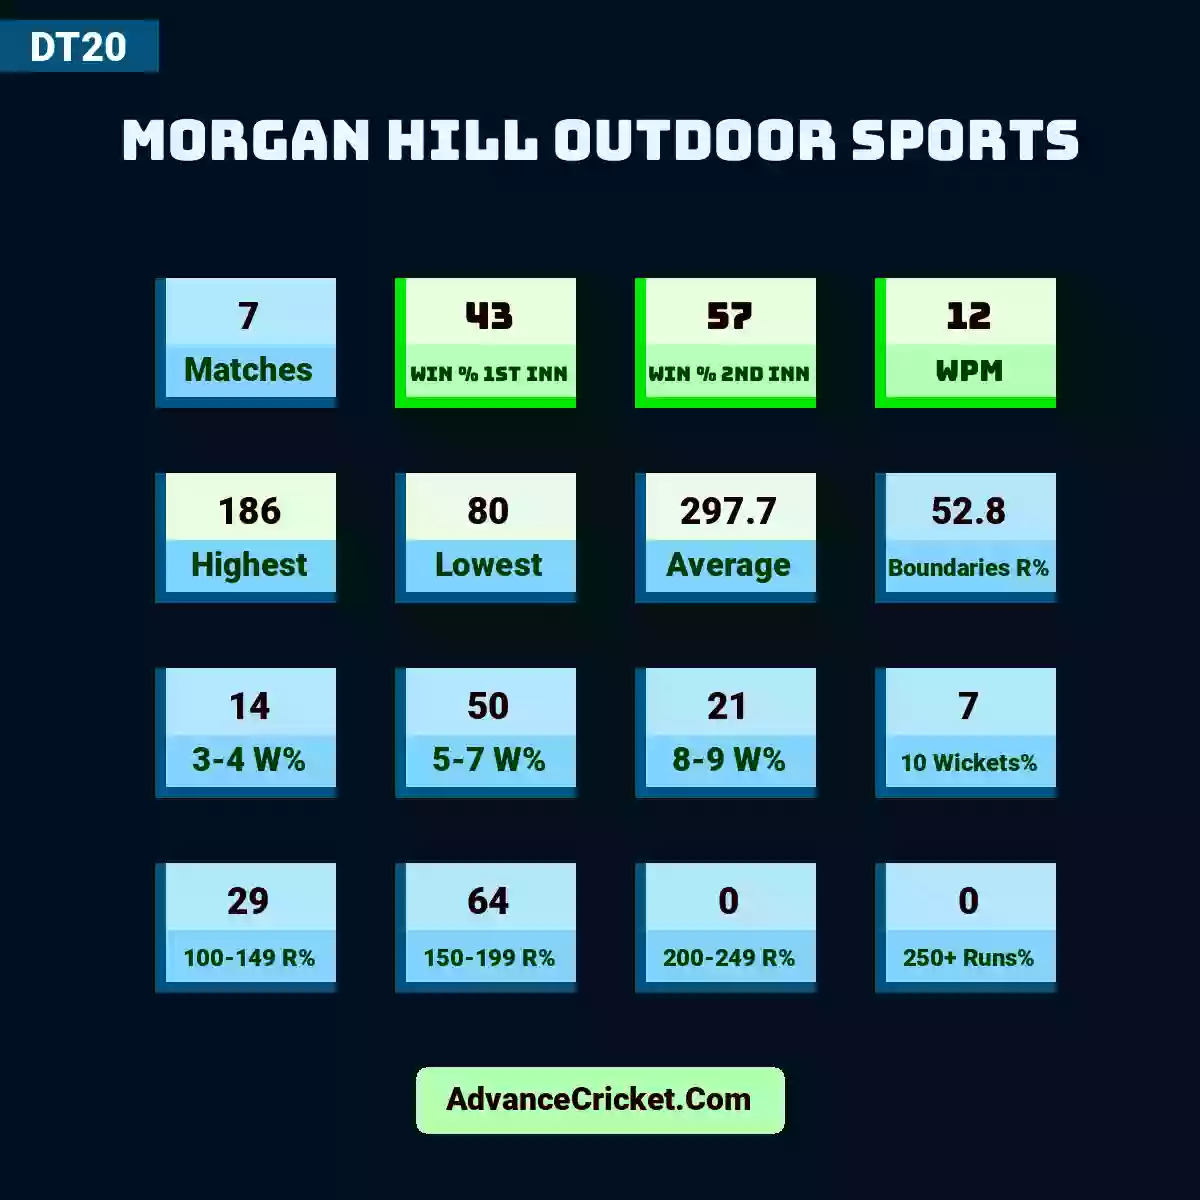 Image showing Morgan Hill Outdoor Sports with Matches: 7, Win % 1st Inn: 43, Win % 2nd Inn: 57, WPM: 12, Highest: 186, Lowest: 80, Average: 297.7, Boundaries R%: 52.8, 3-4 W%: 14, 5-7 W%: 50, 8-9 W%: 21, 10 Wickets%: 7, 100-149 R%: 29, 150-199 R%: 64, 200-249 R%: 0, 250+ Runs%: 0.